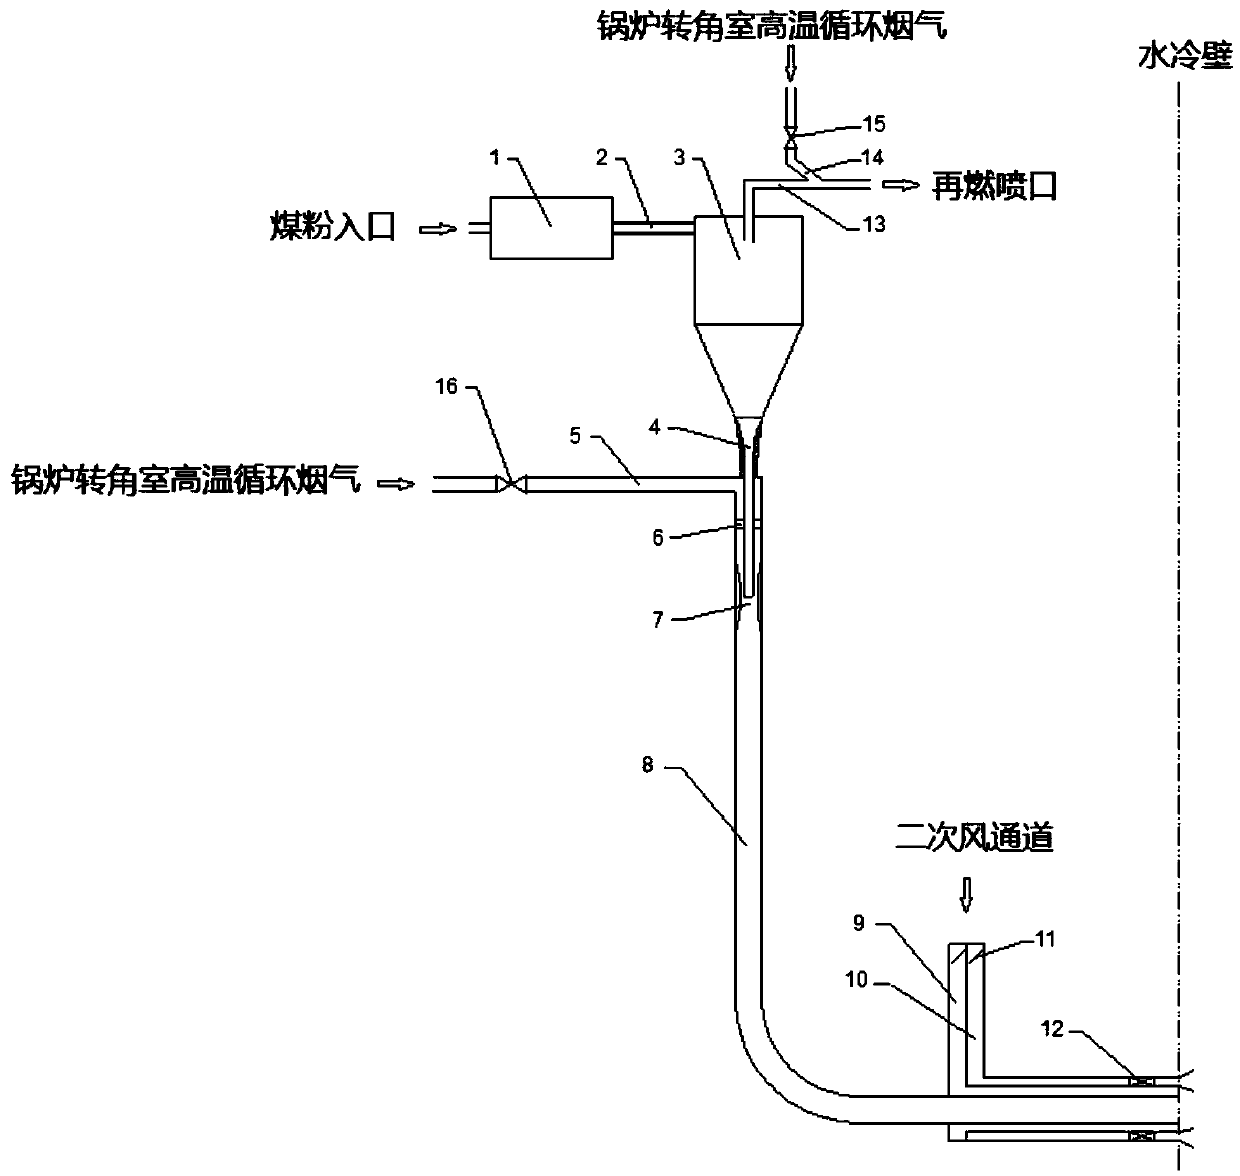 Pulverized coal pre-pyrolyzation decoupling combustion device